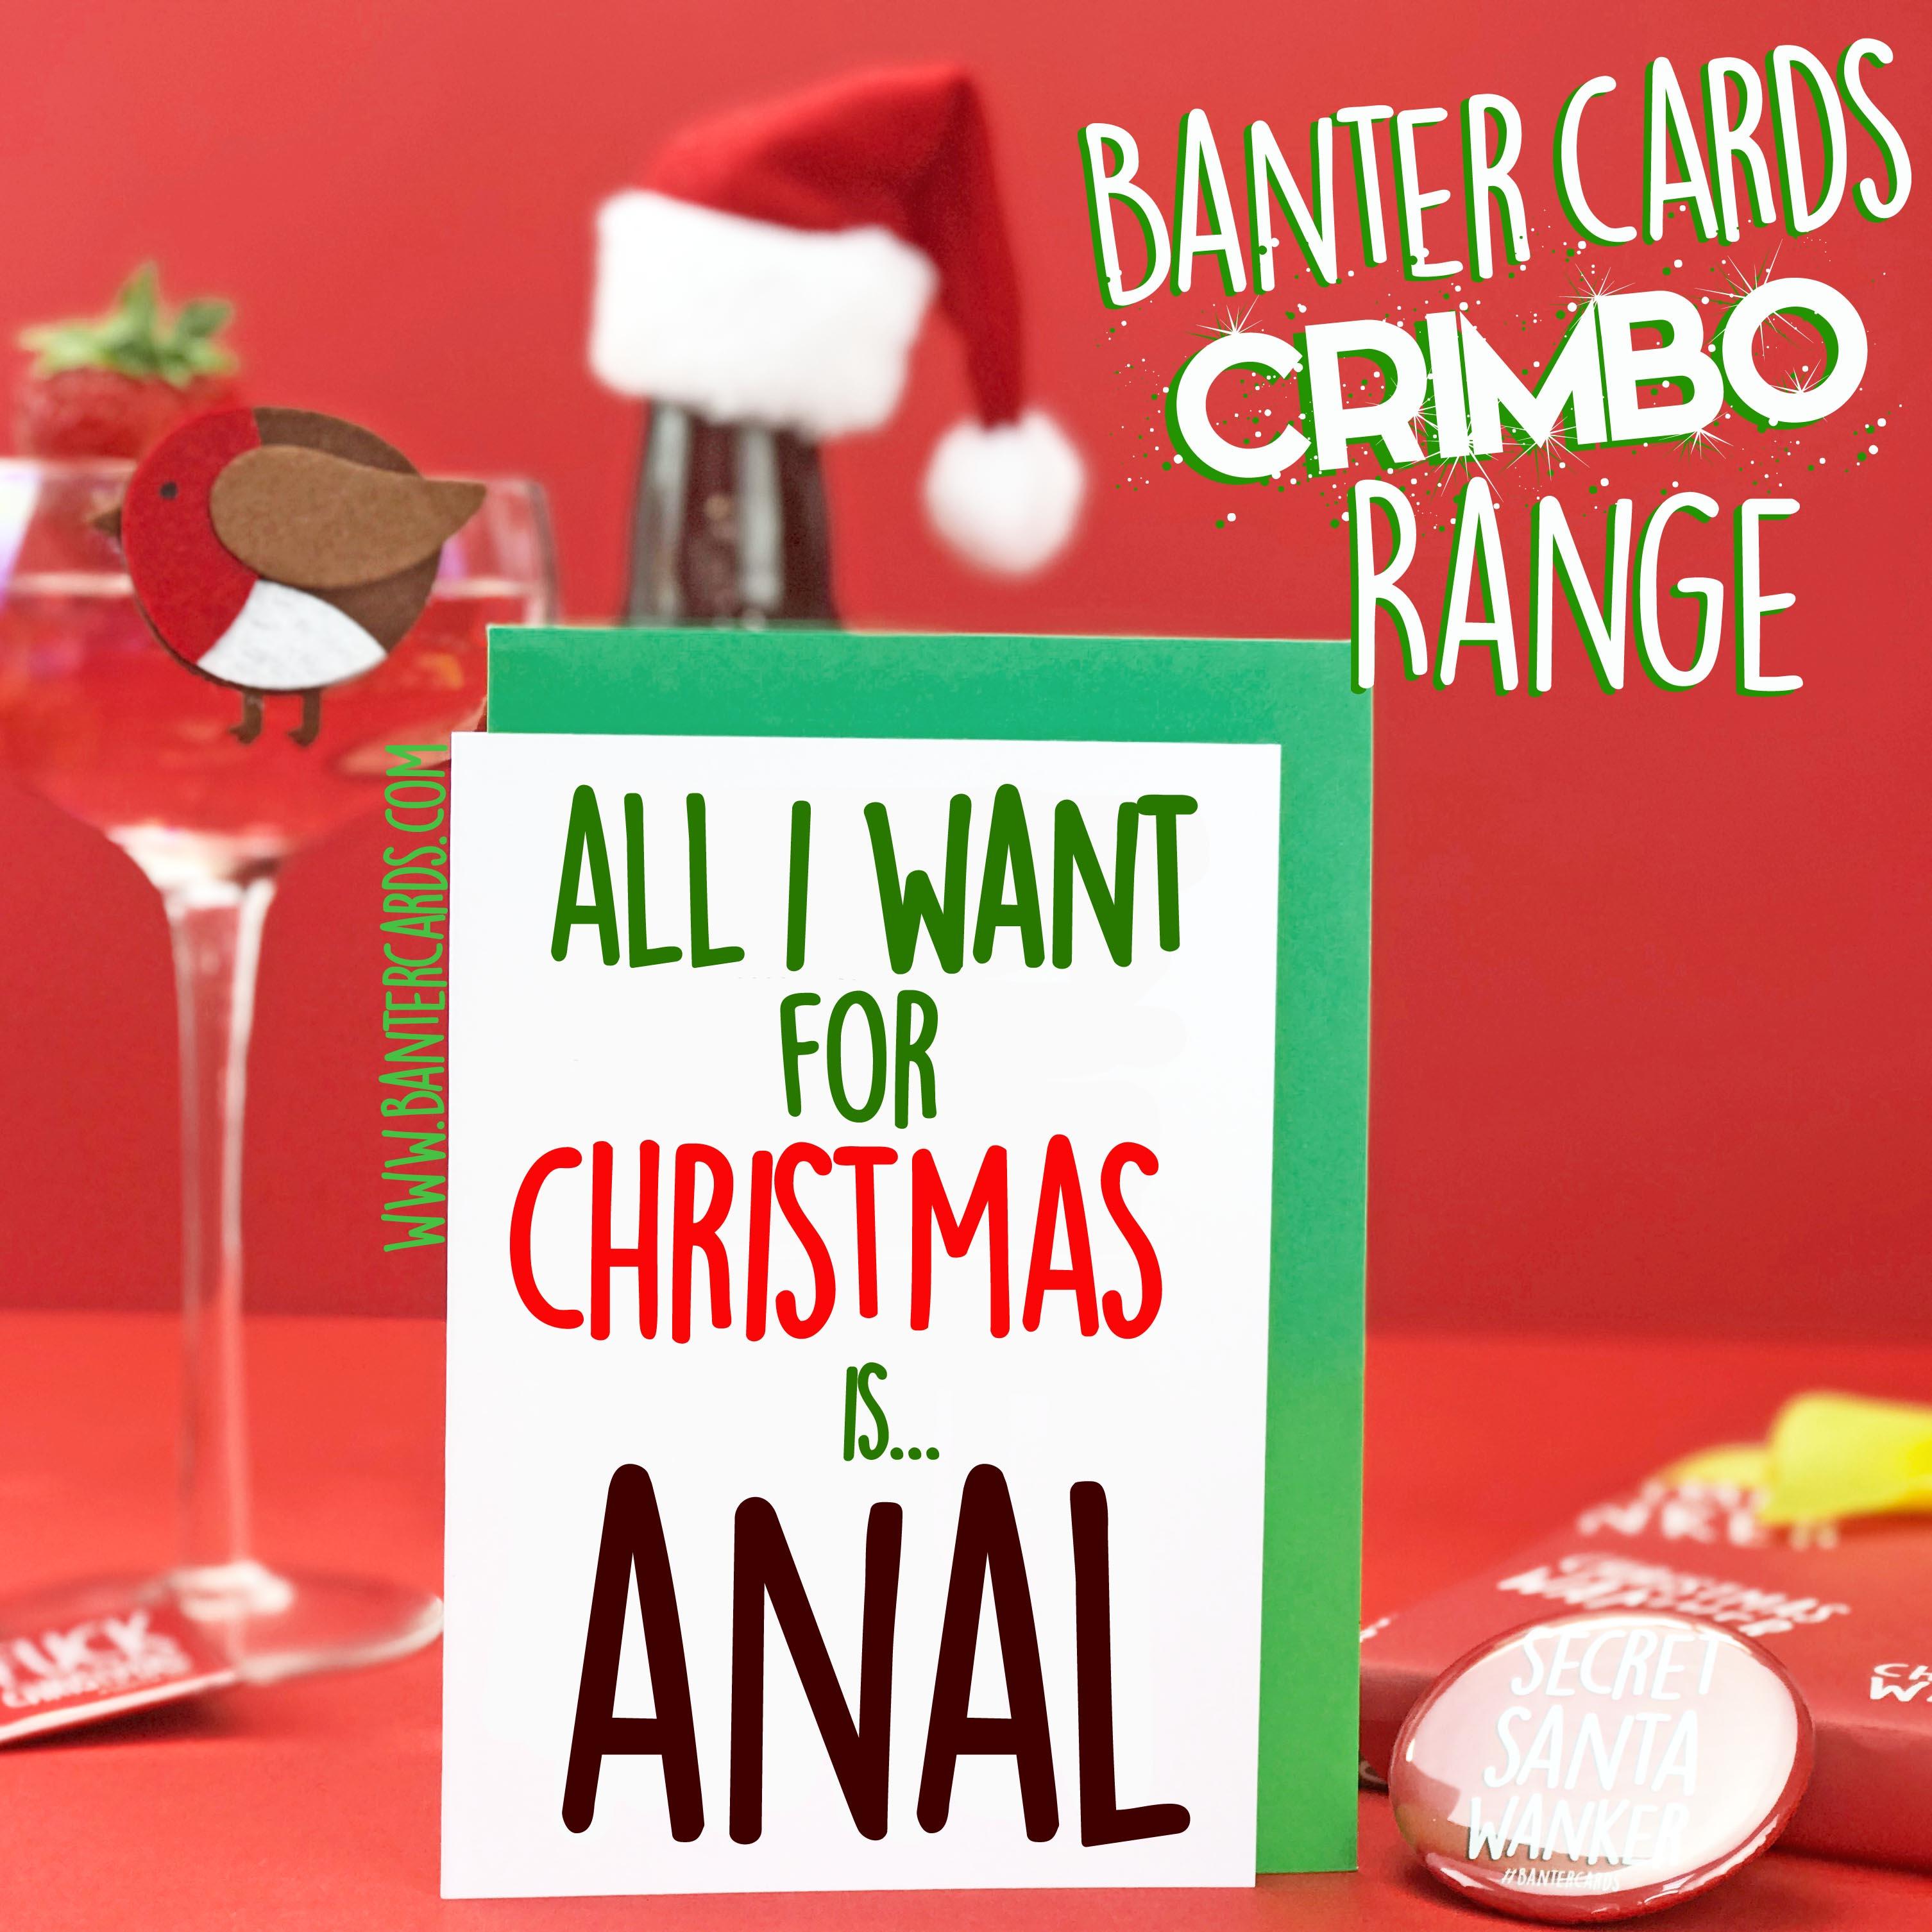 All i want for christmas is anal